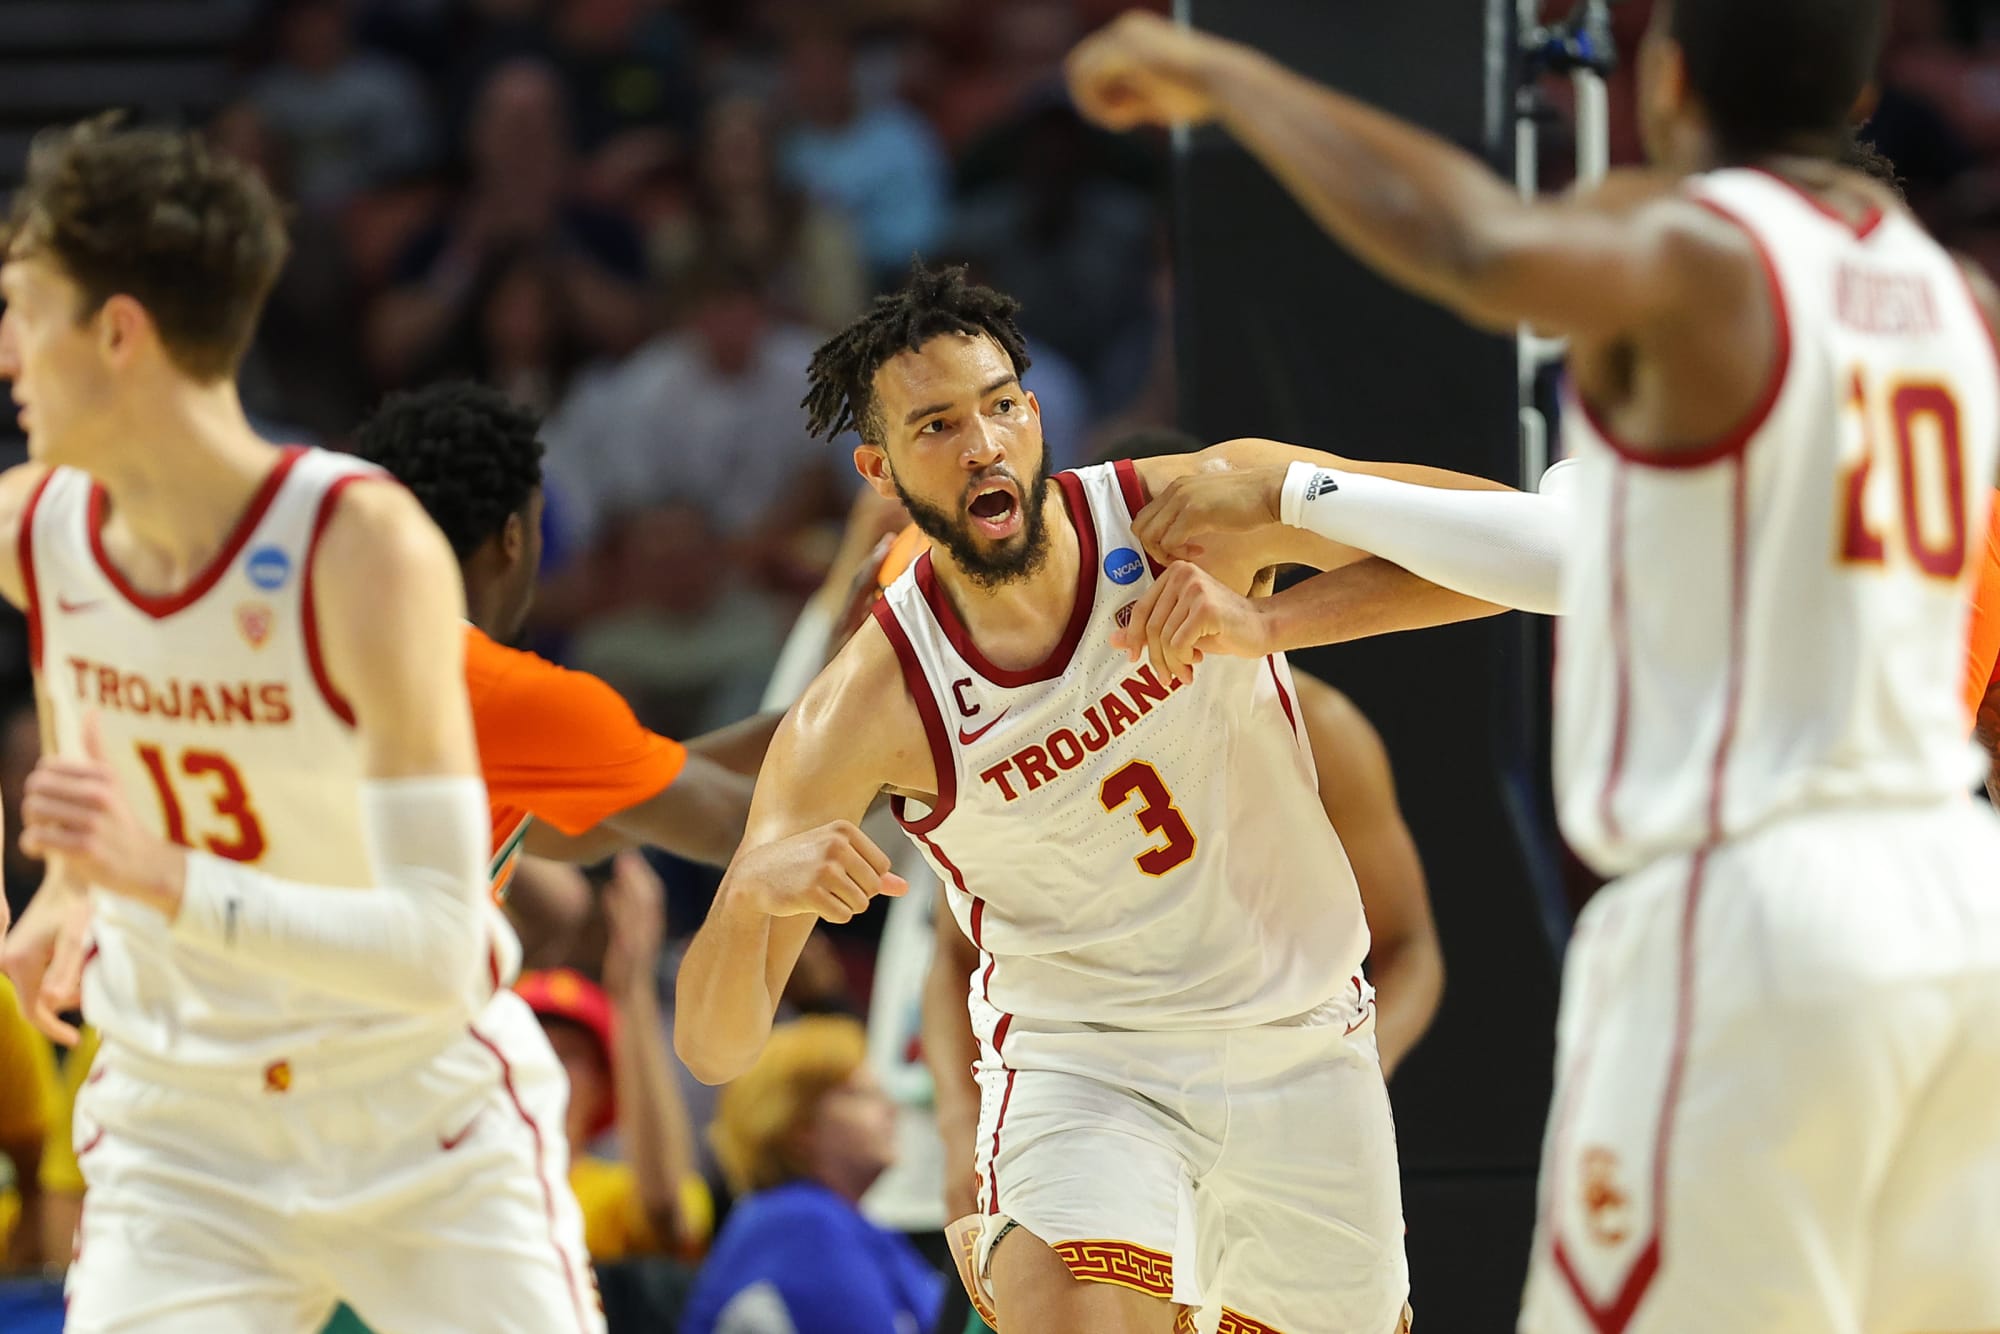 Cleveland Cavaliers Summer League team proved they have work to do